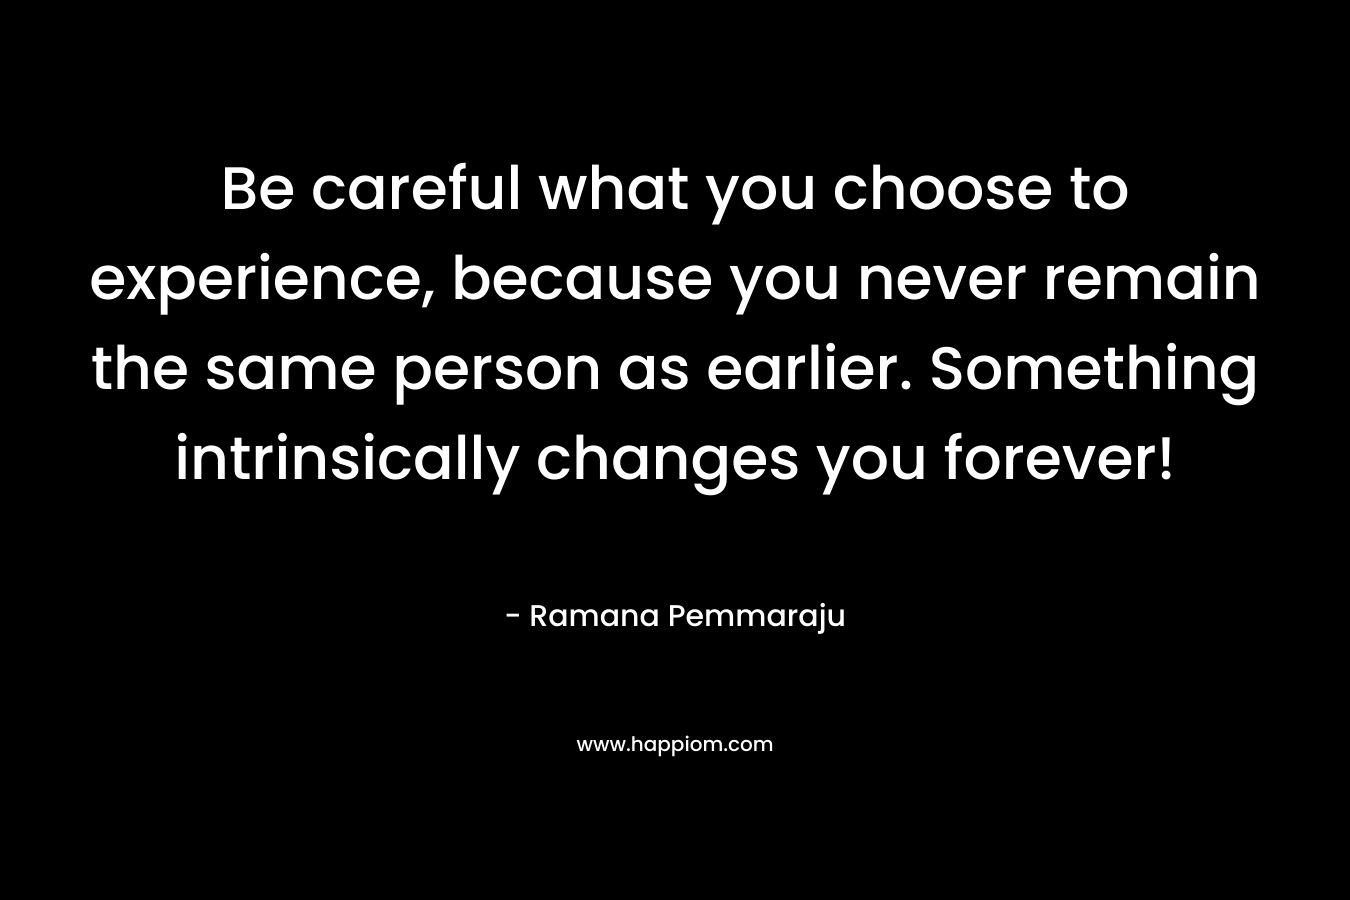 Be careful what you choose to experience, because you never remain the same person as earlier. Something intrinsically changes you forever!